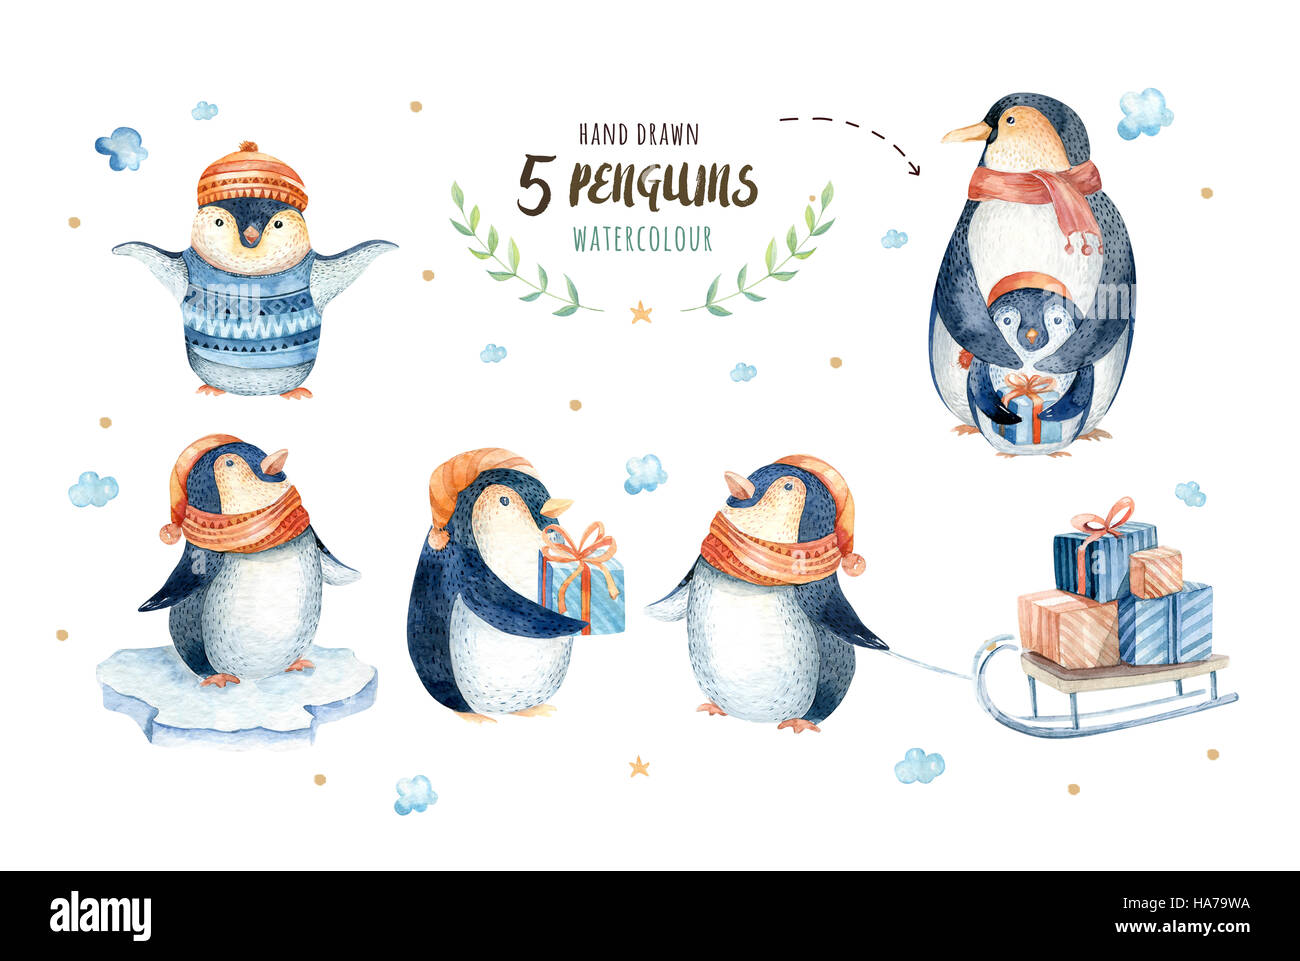 Merry christmas snowflakes and penguins Hand drawn illustration Stock Image